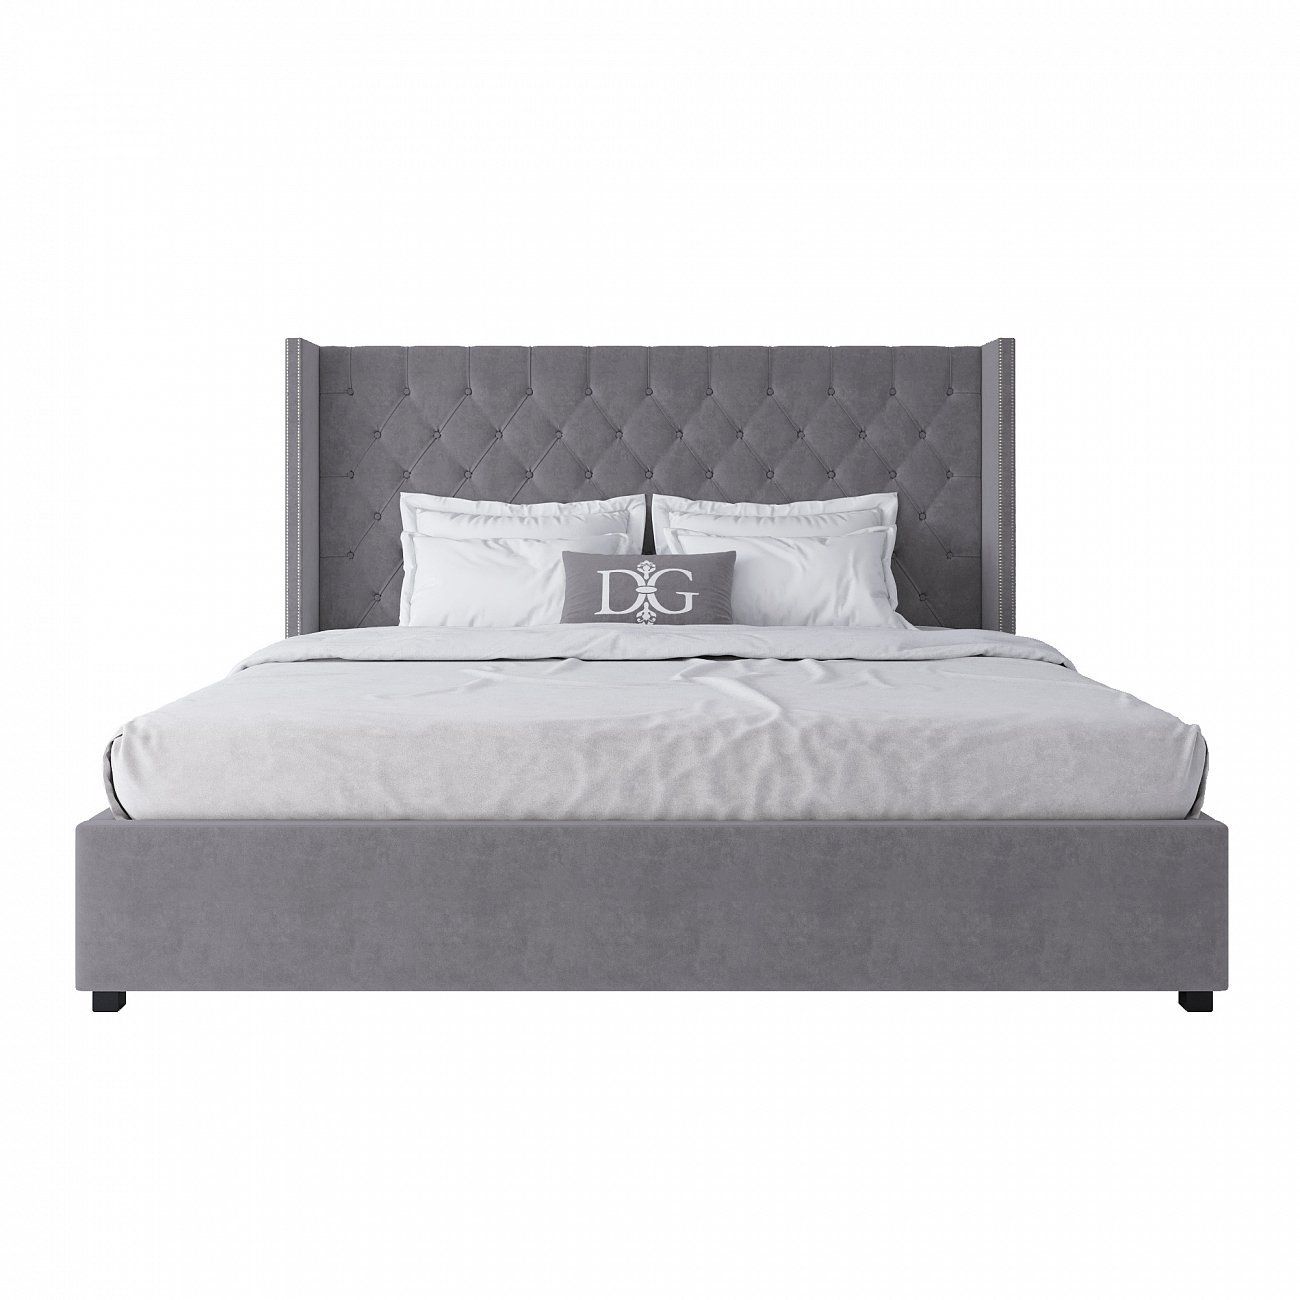 Double bed with upholstered headboard 200x200 cm grey Wing